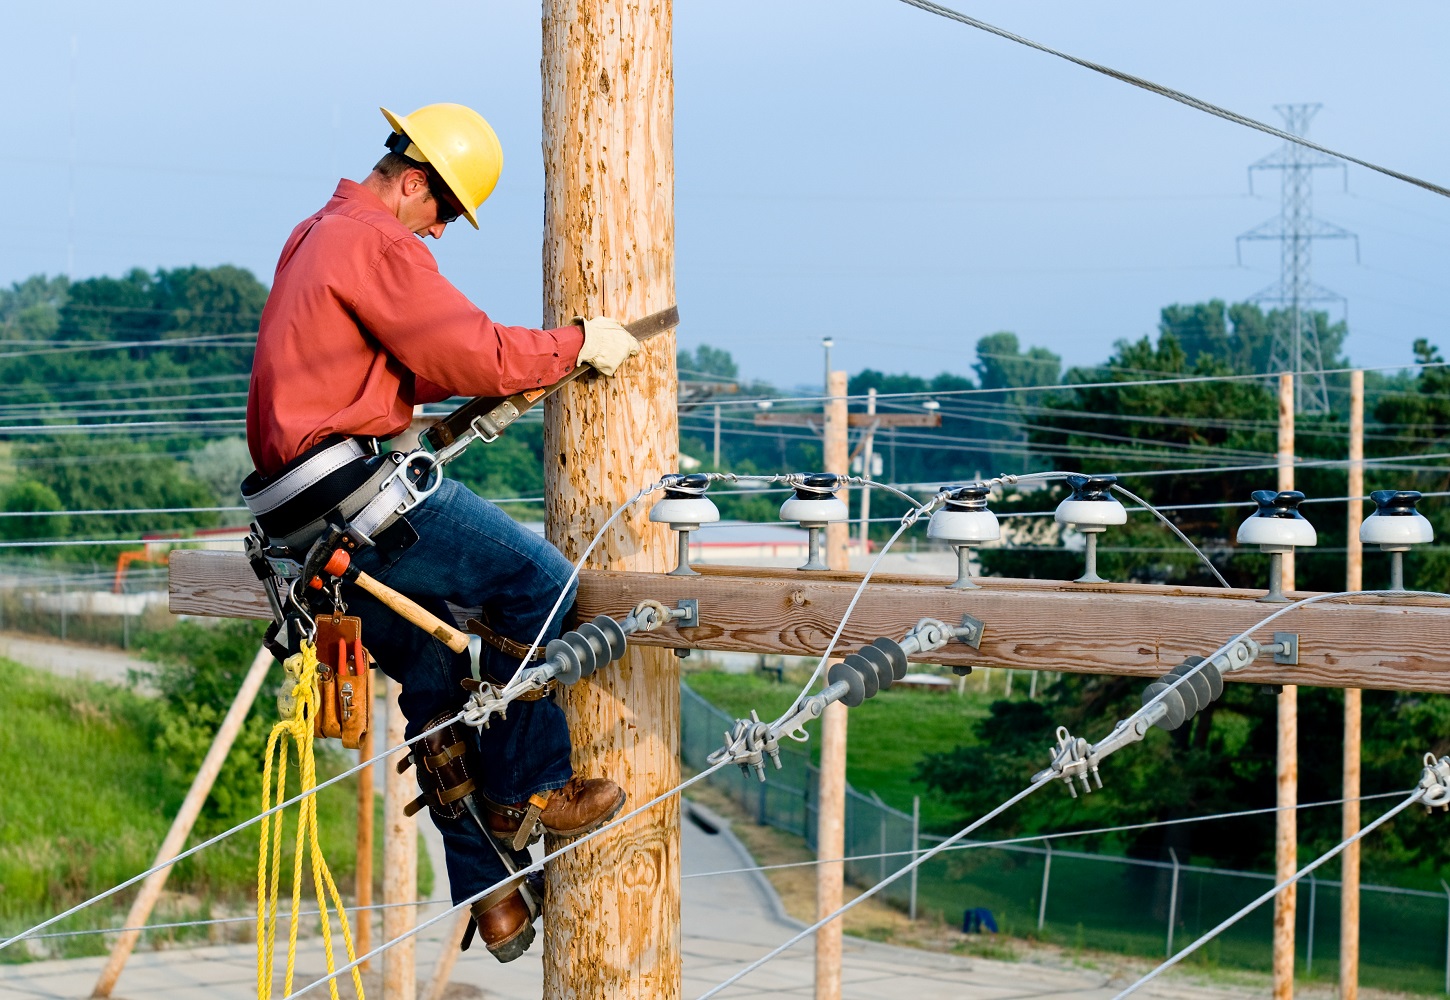 Interested in Becoming a Lineman? Start Your Career as a Lineman with These Steps